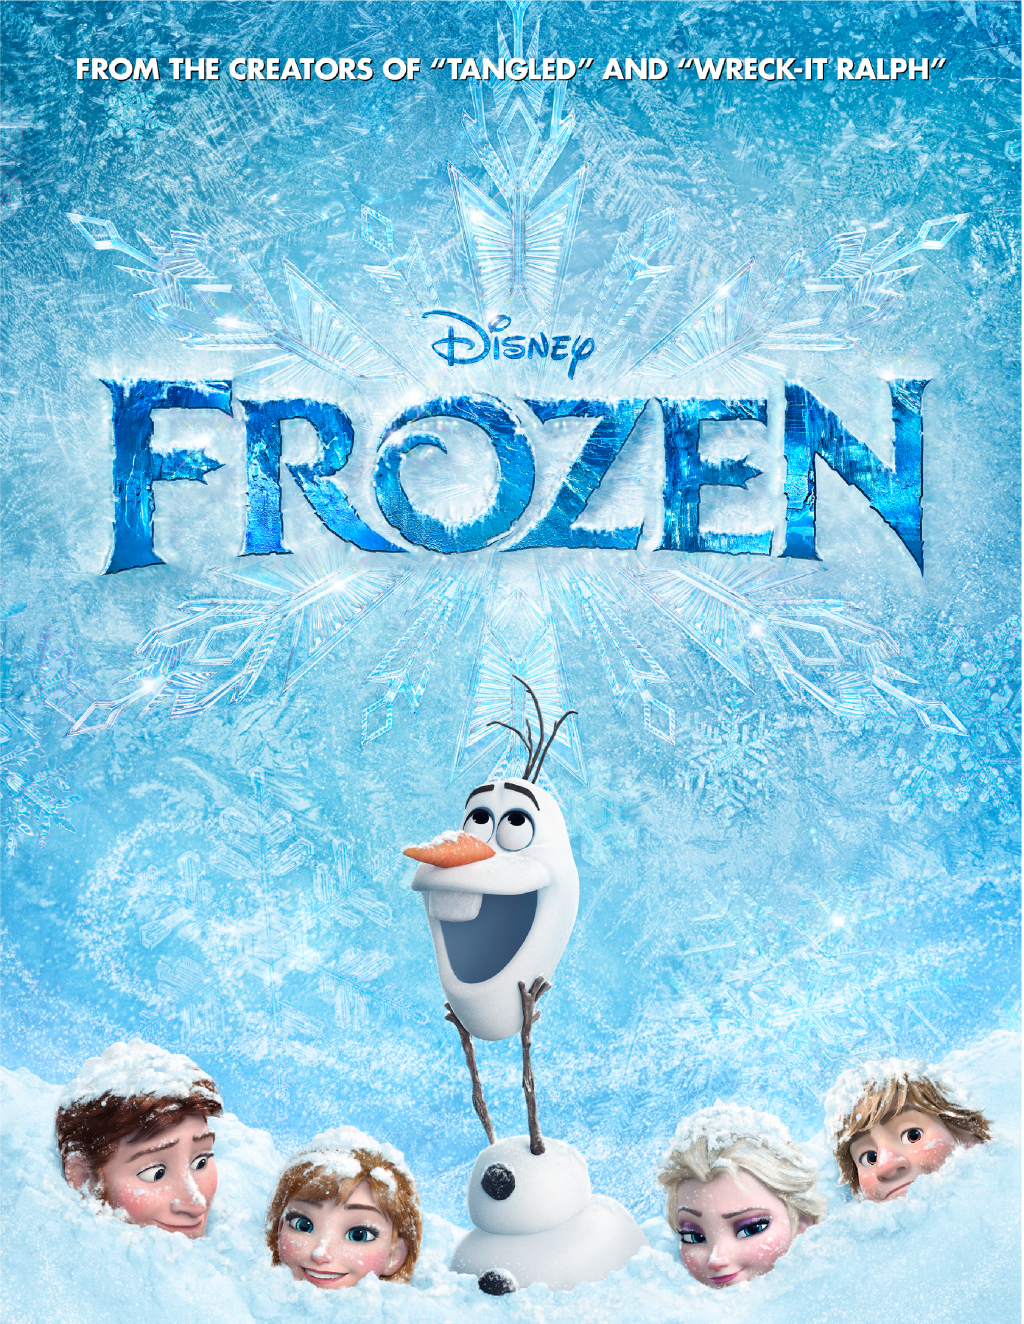 FROZEN, In Summer - Sing-a-long with Olaf